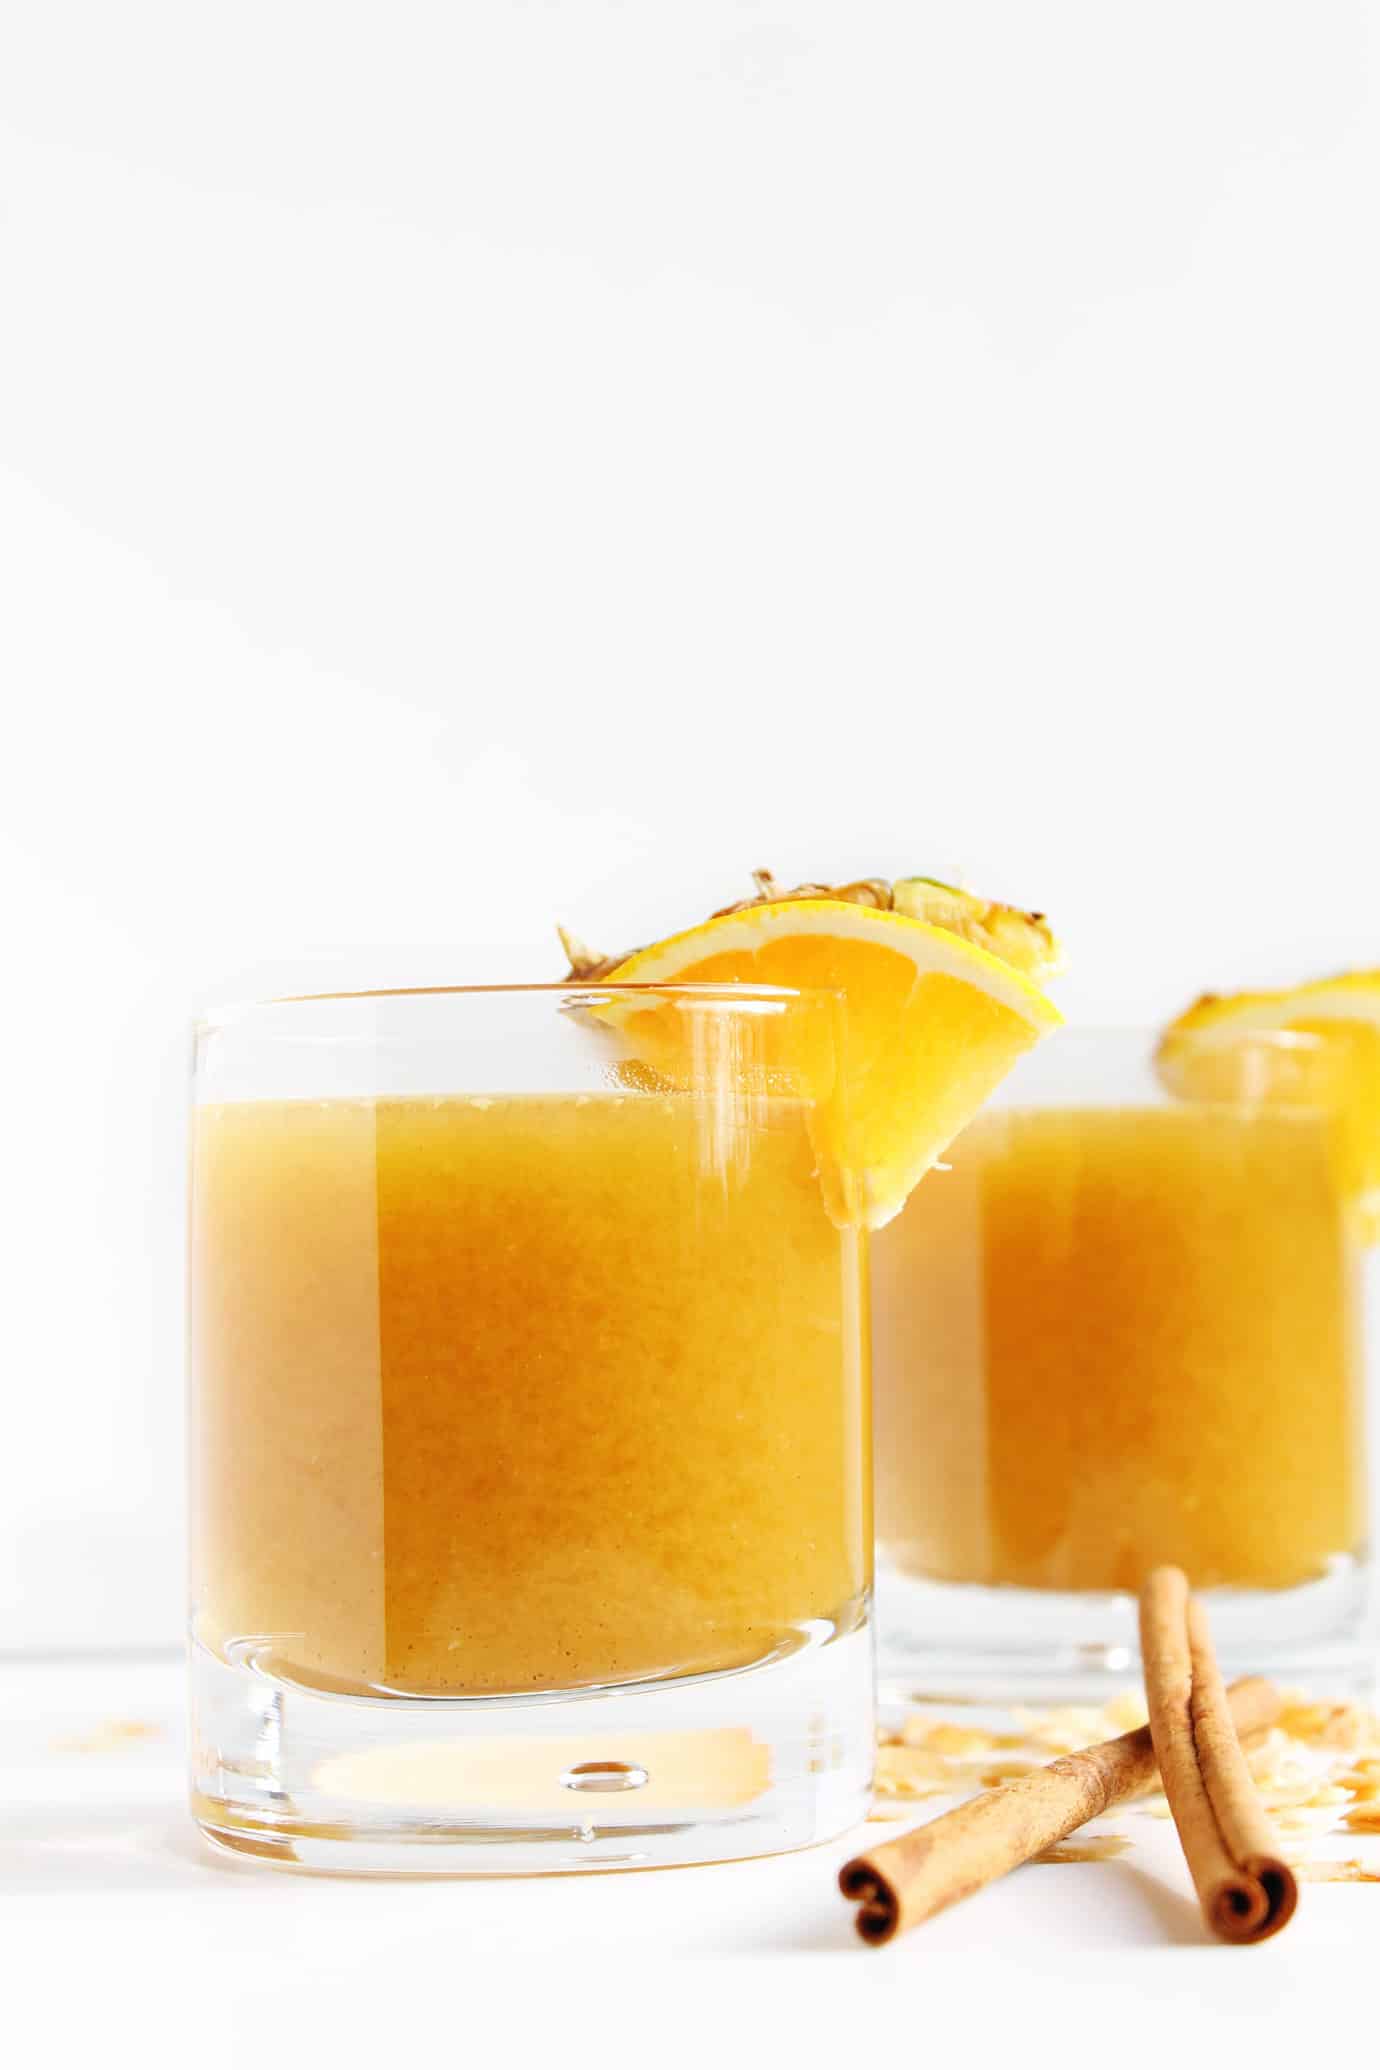 Pineapple cider rum cocktail recipe! Pineapple juice is mulled with cinnamon, orange, coconut, and other spices, then chilled and mixed with dark spiced rum. Such an awesome Fall or Winter cocktail!